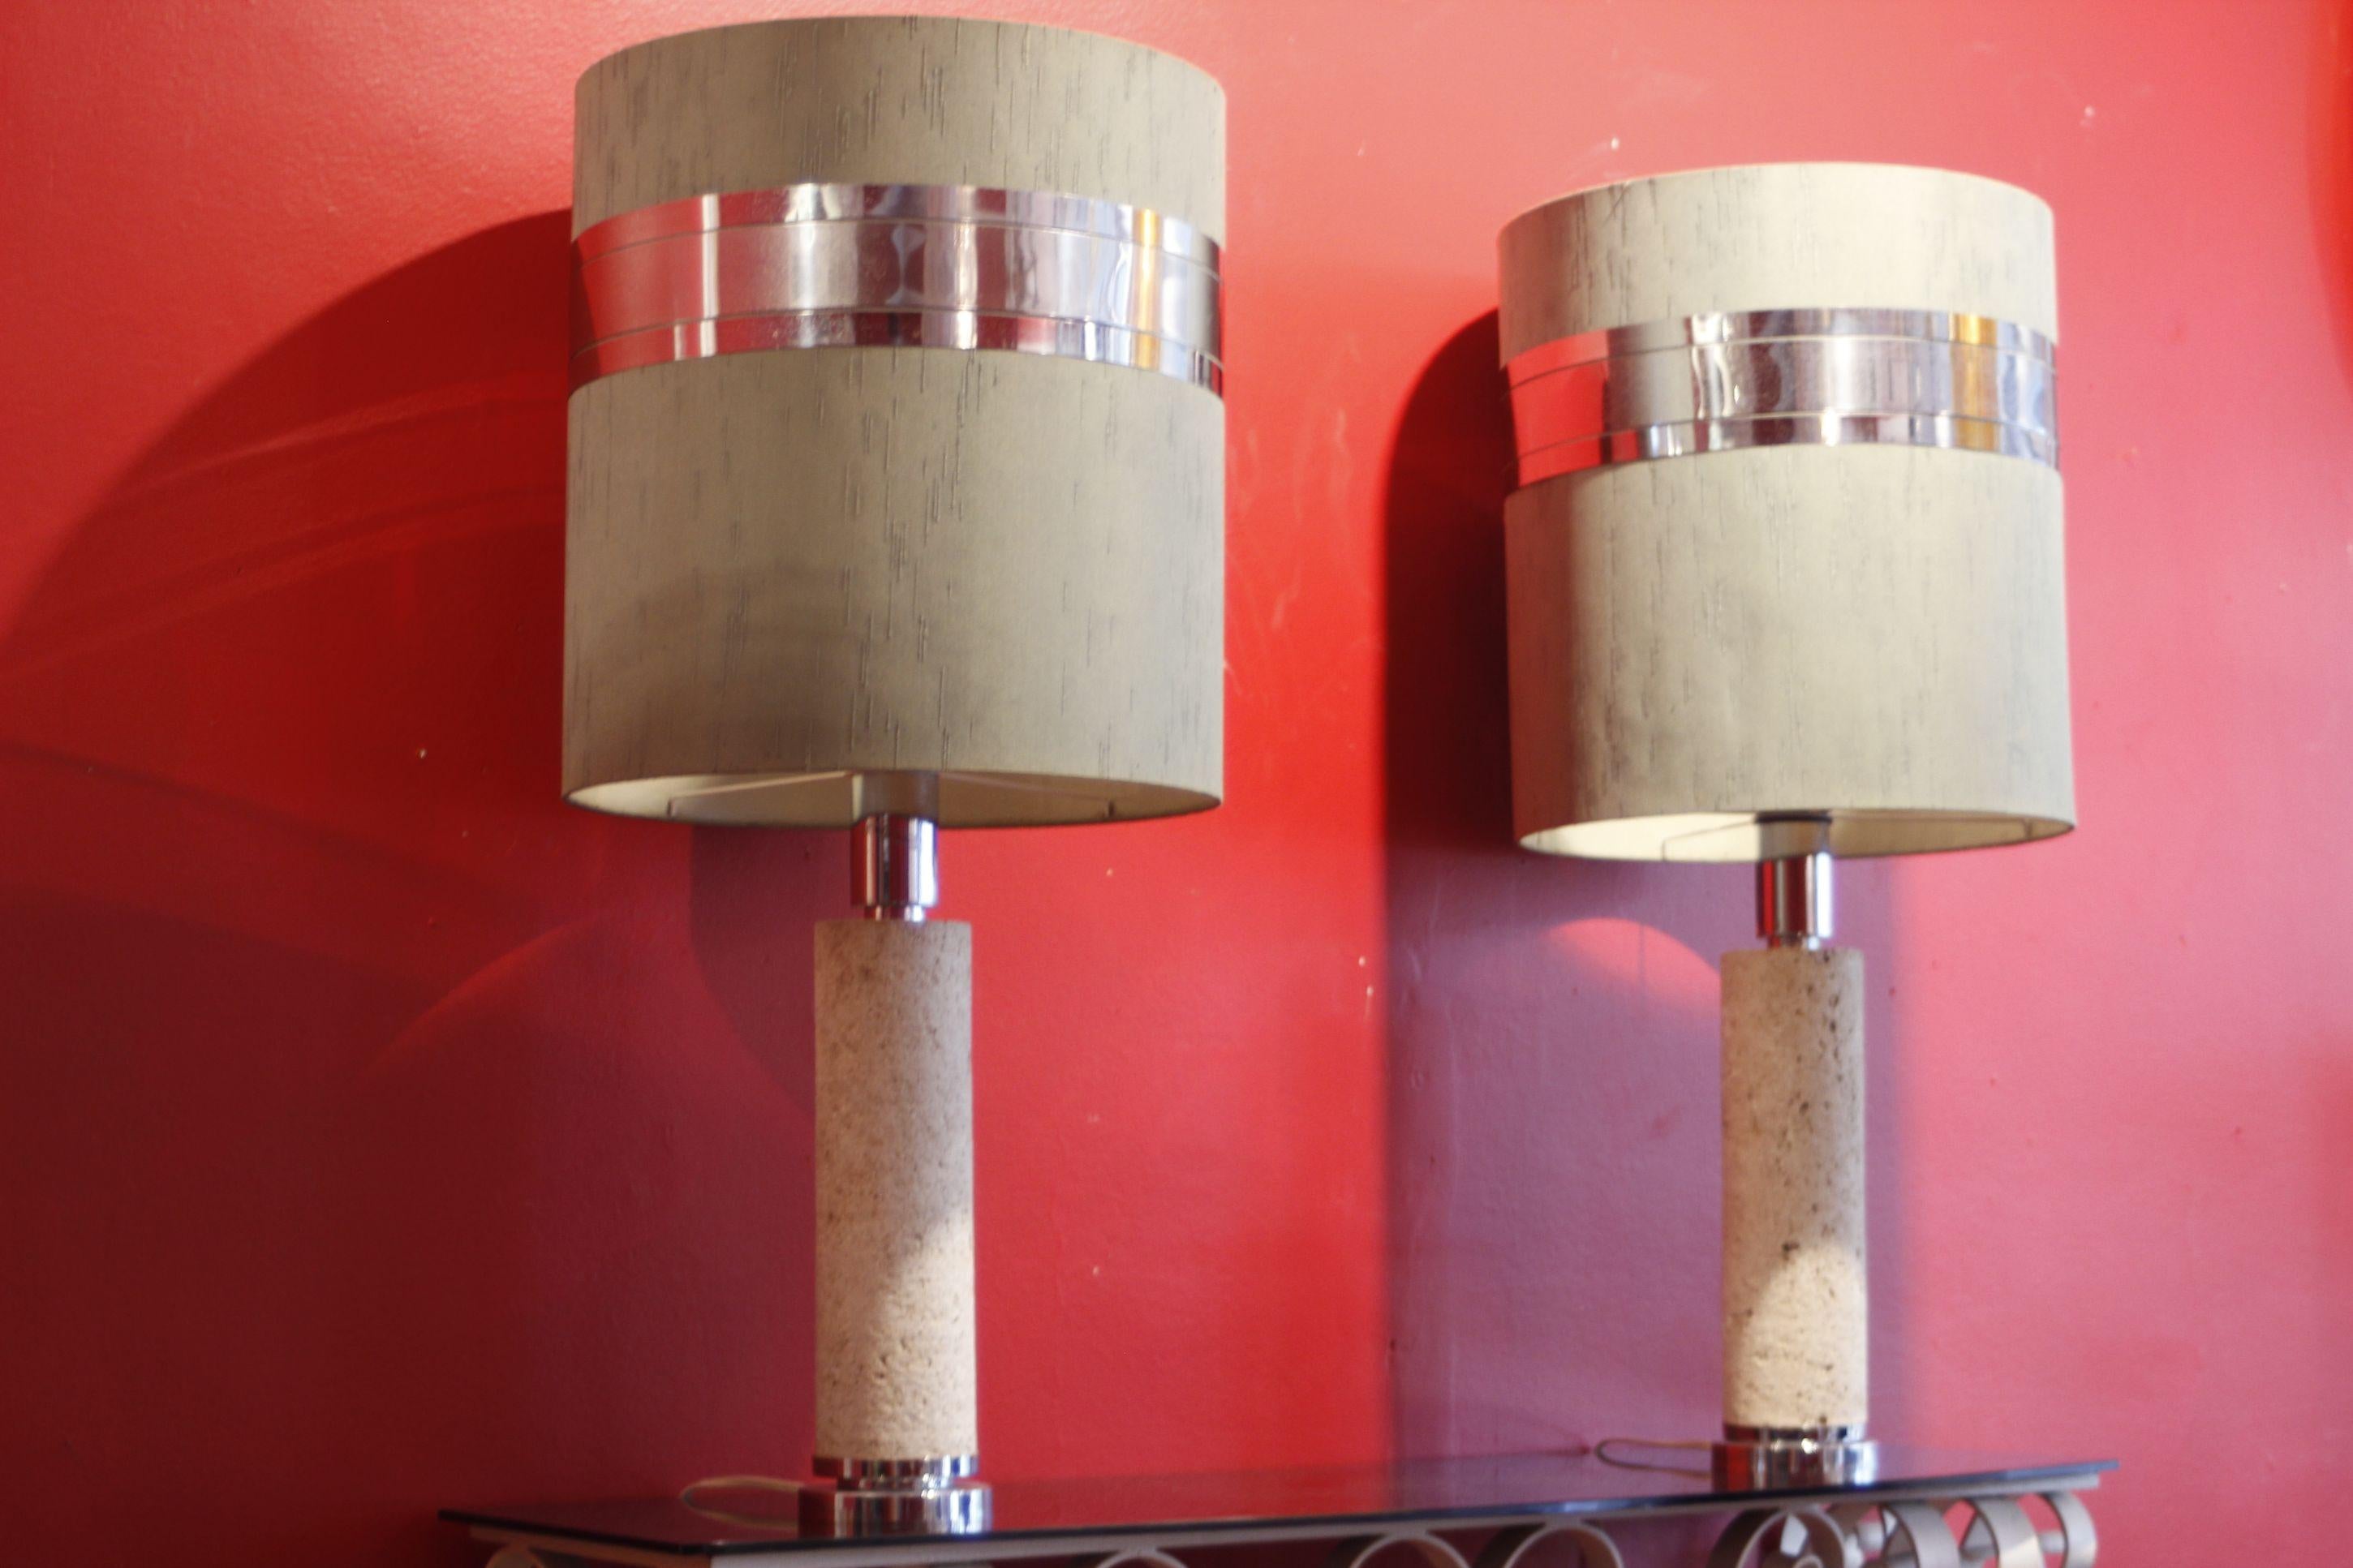 Pair of tall table lamps with large original lampshades by CE.VA Study, Firenze Italy circa 1970. 

The base is in turned travertine, mounted on a chromed steel base, the bulb fitting is also adorned with chromed steel, the lampshades are the